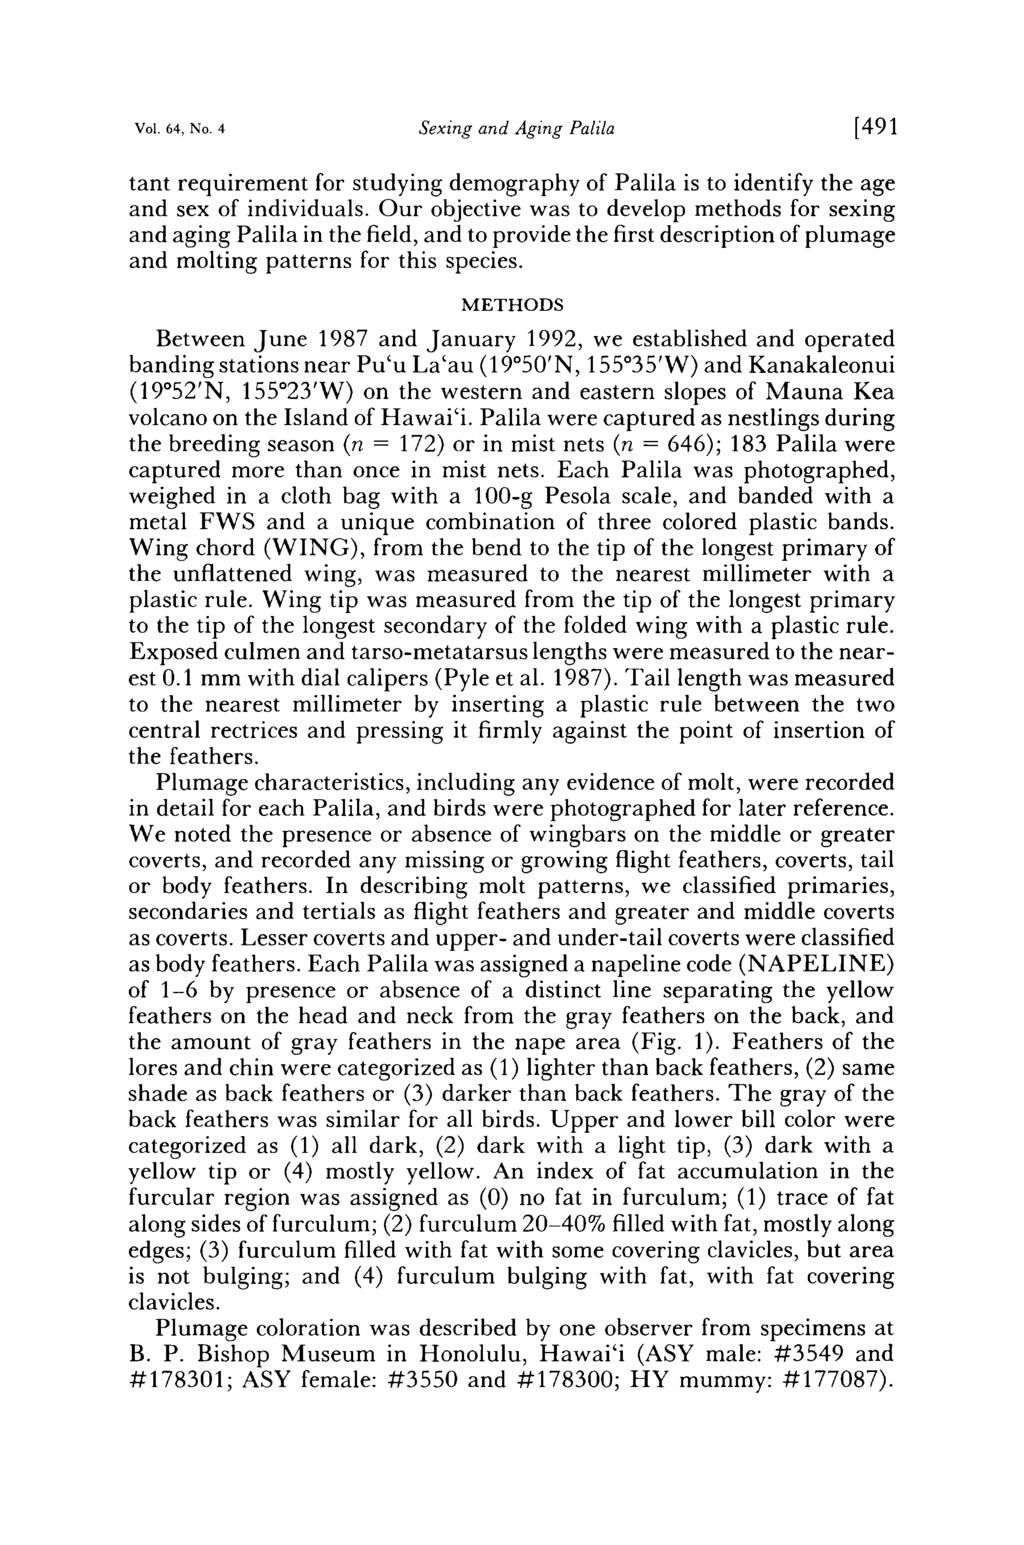 Vol. 64, No. 4 Sexing and Aging Palila [491 tant requirement for studying demography of Palila is to identify the age and sex of individuals.